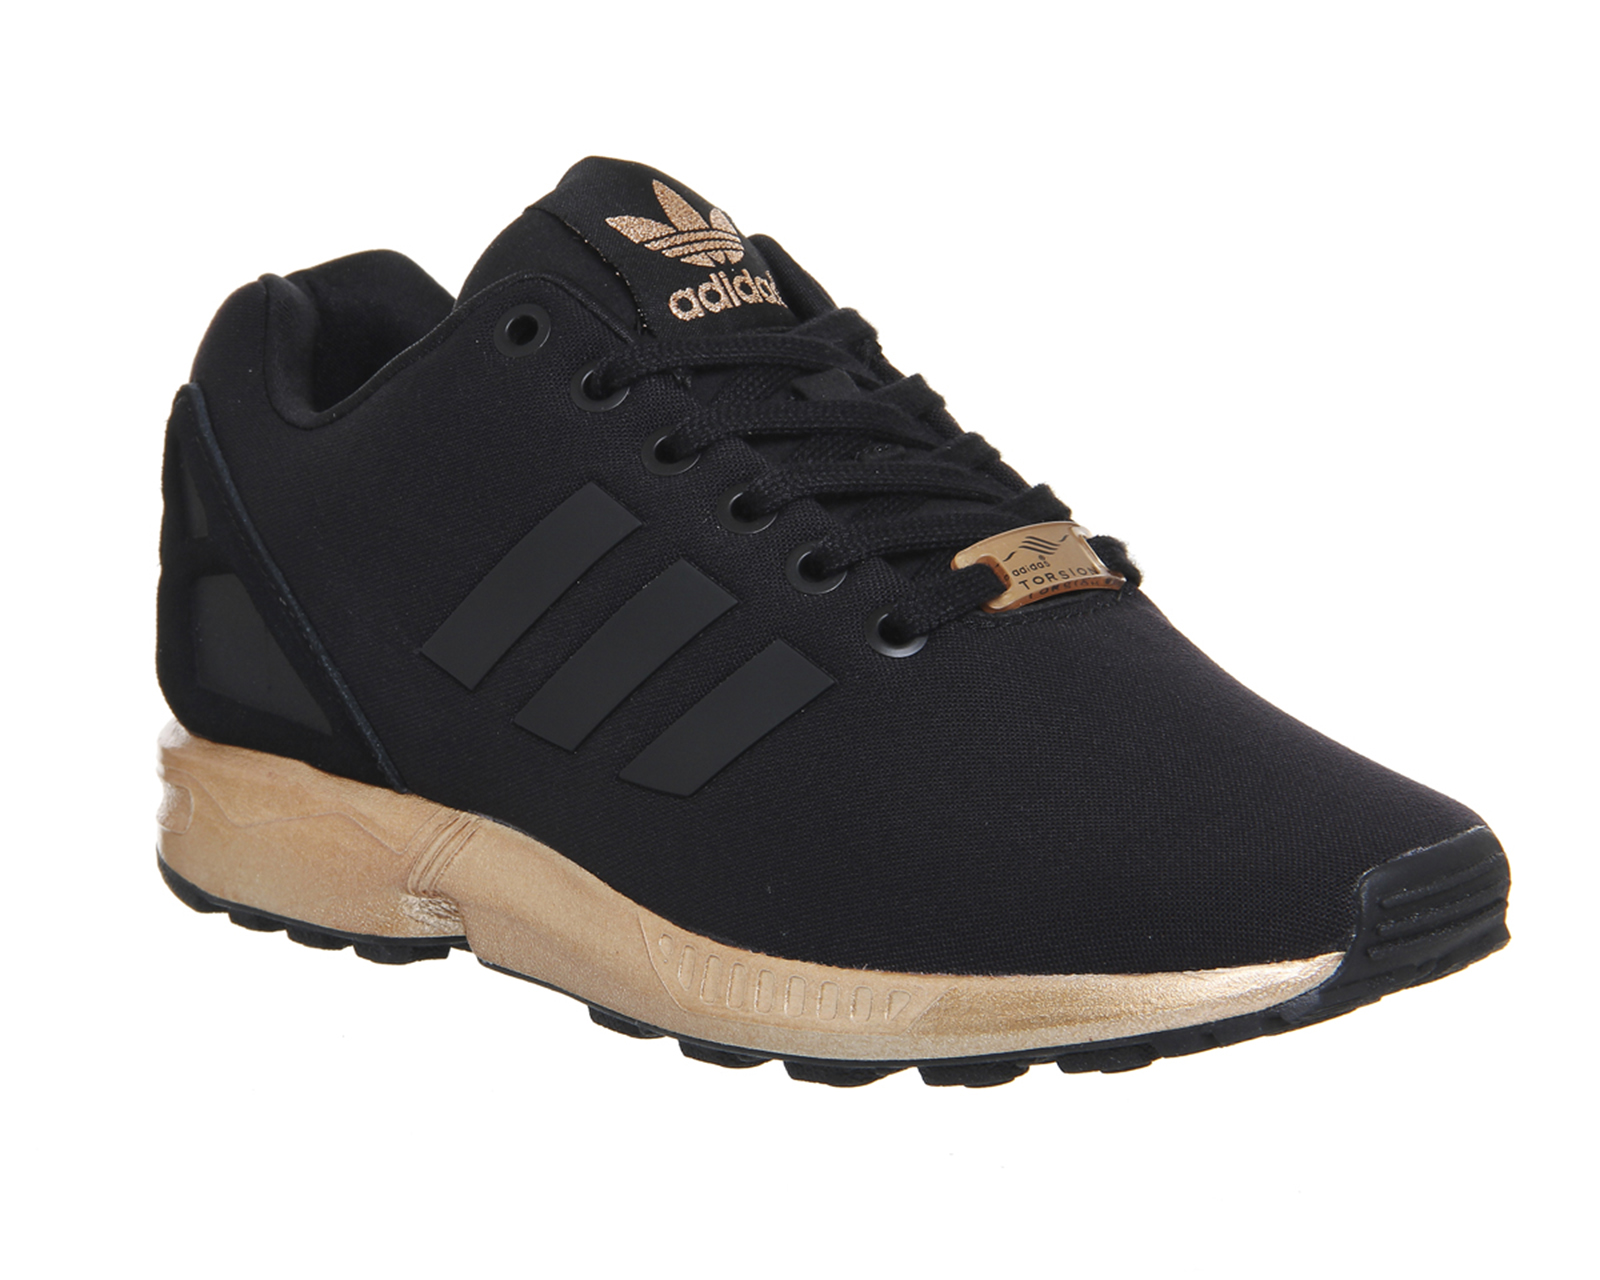 adidas zx flux black and gold womens